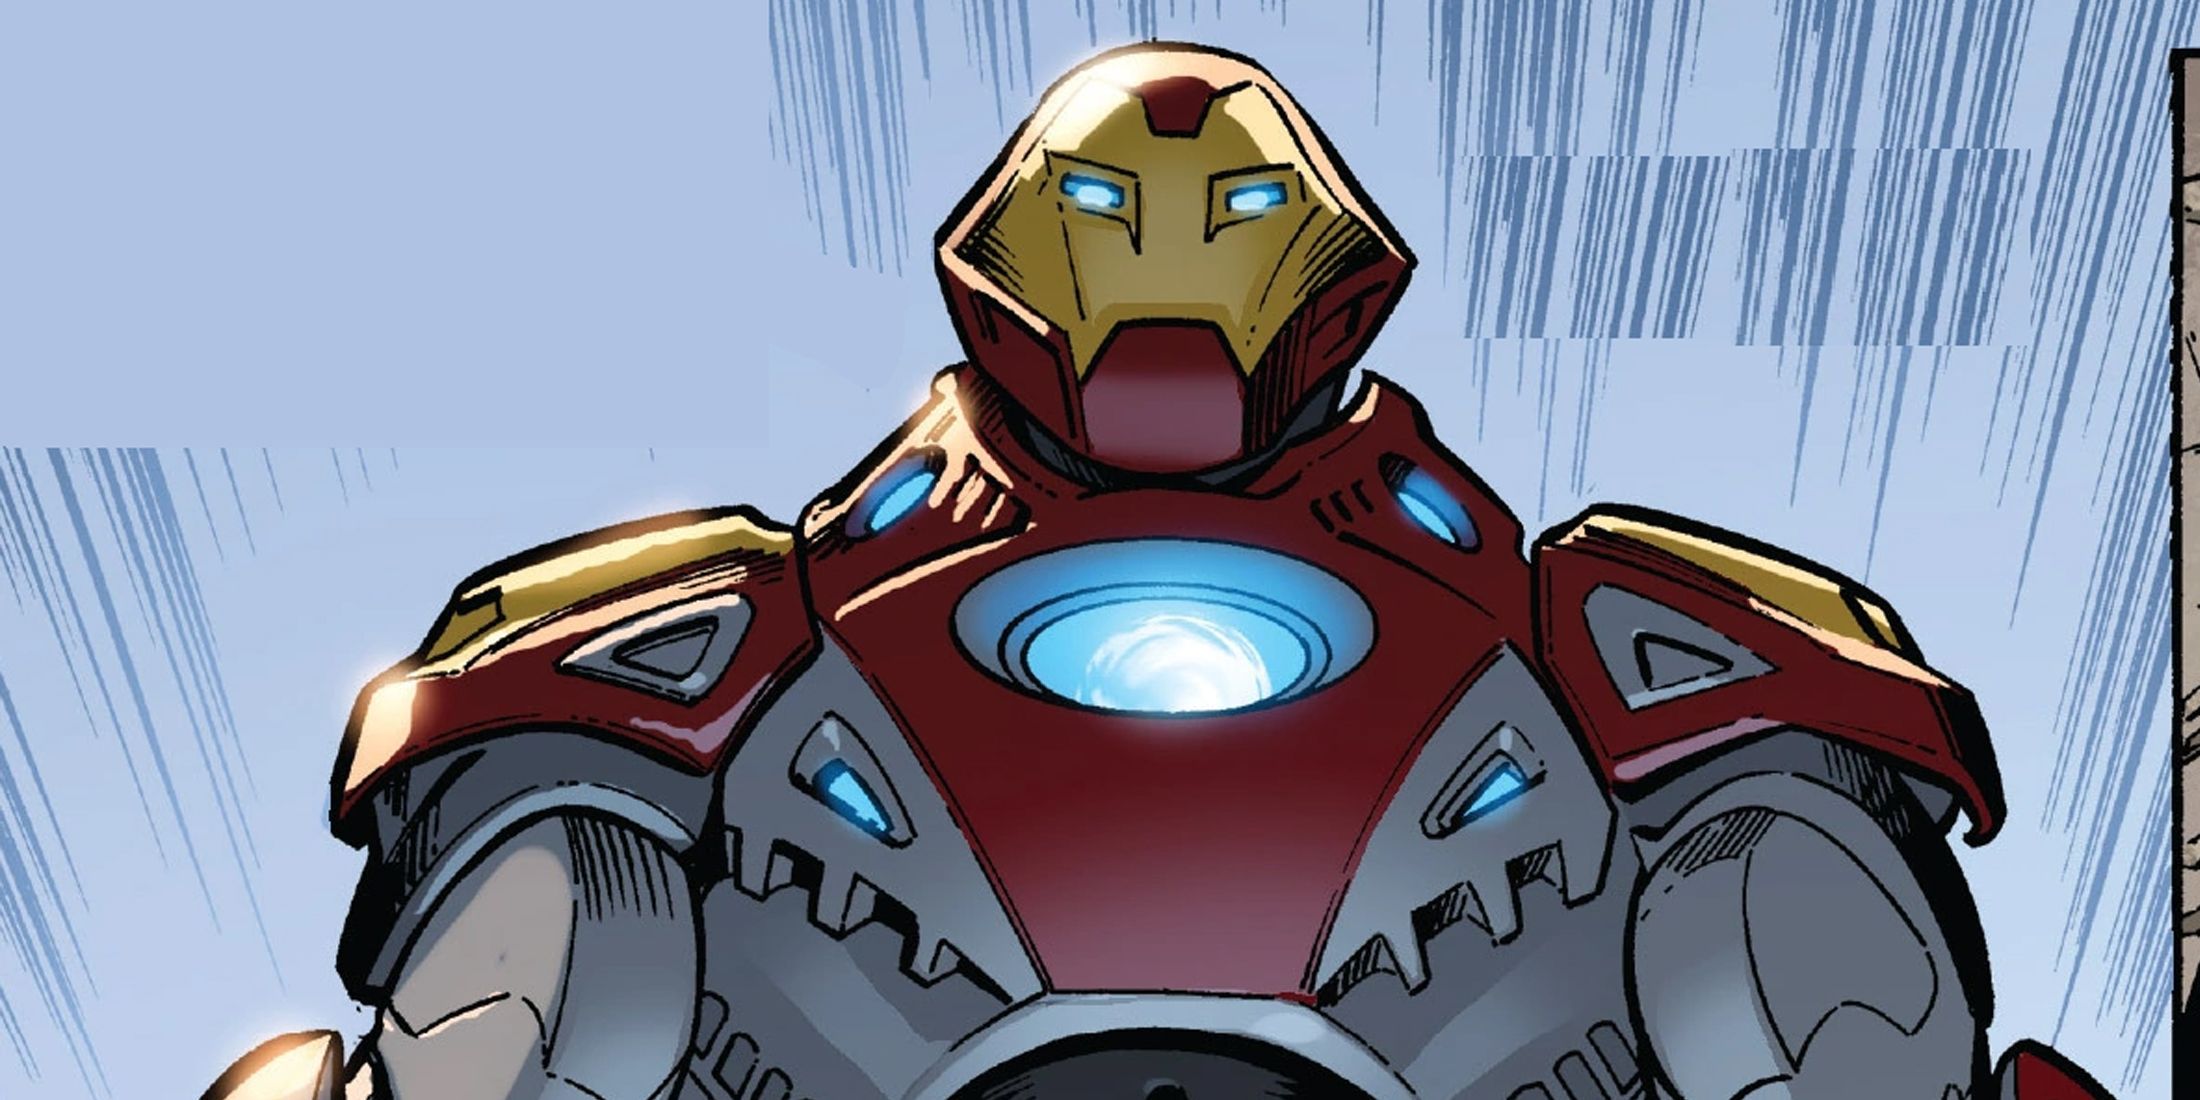 An image of Iron Man in his Ultimate armor from the Marvel comics.